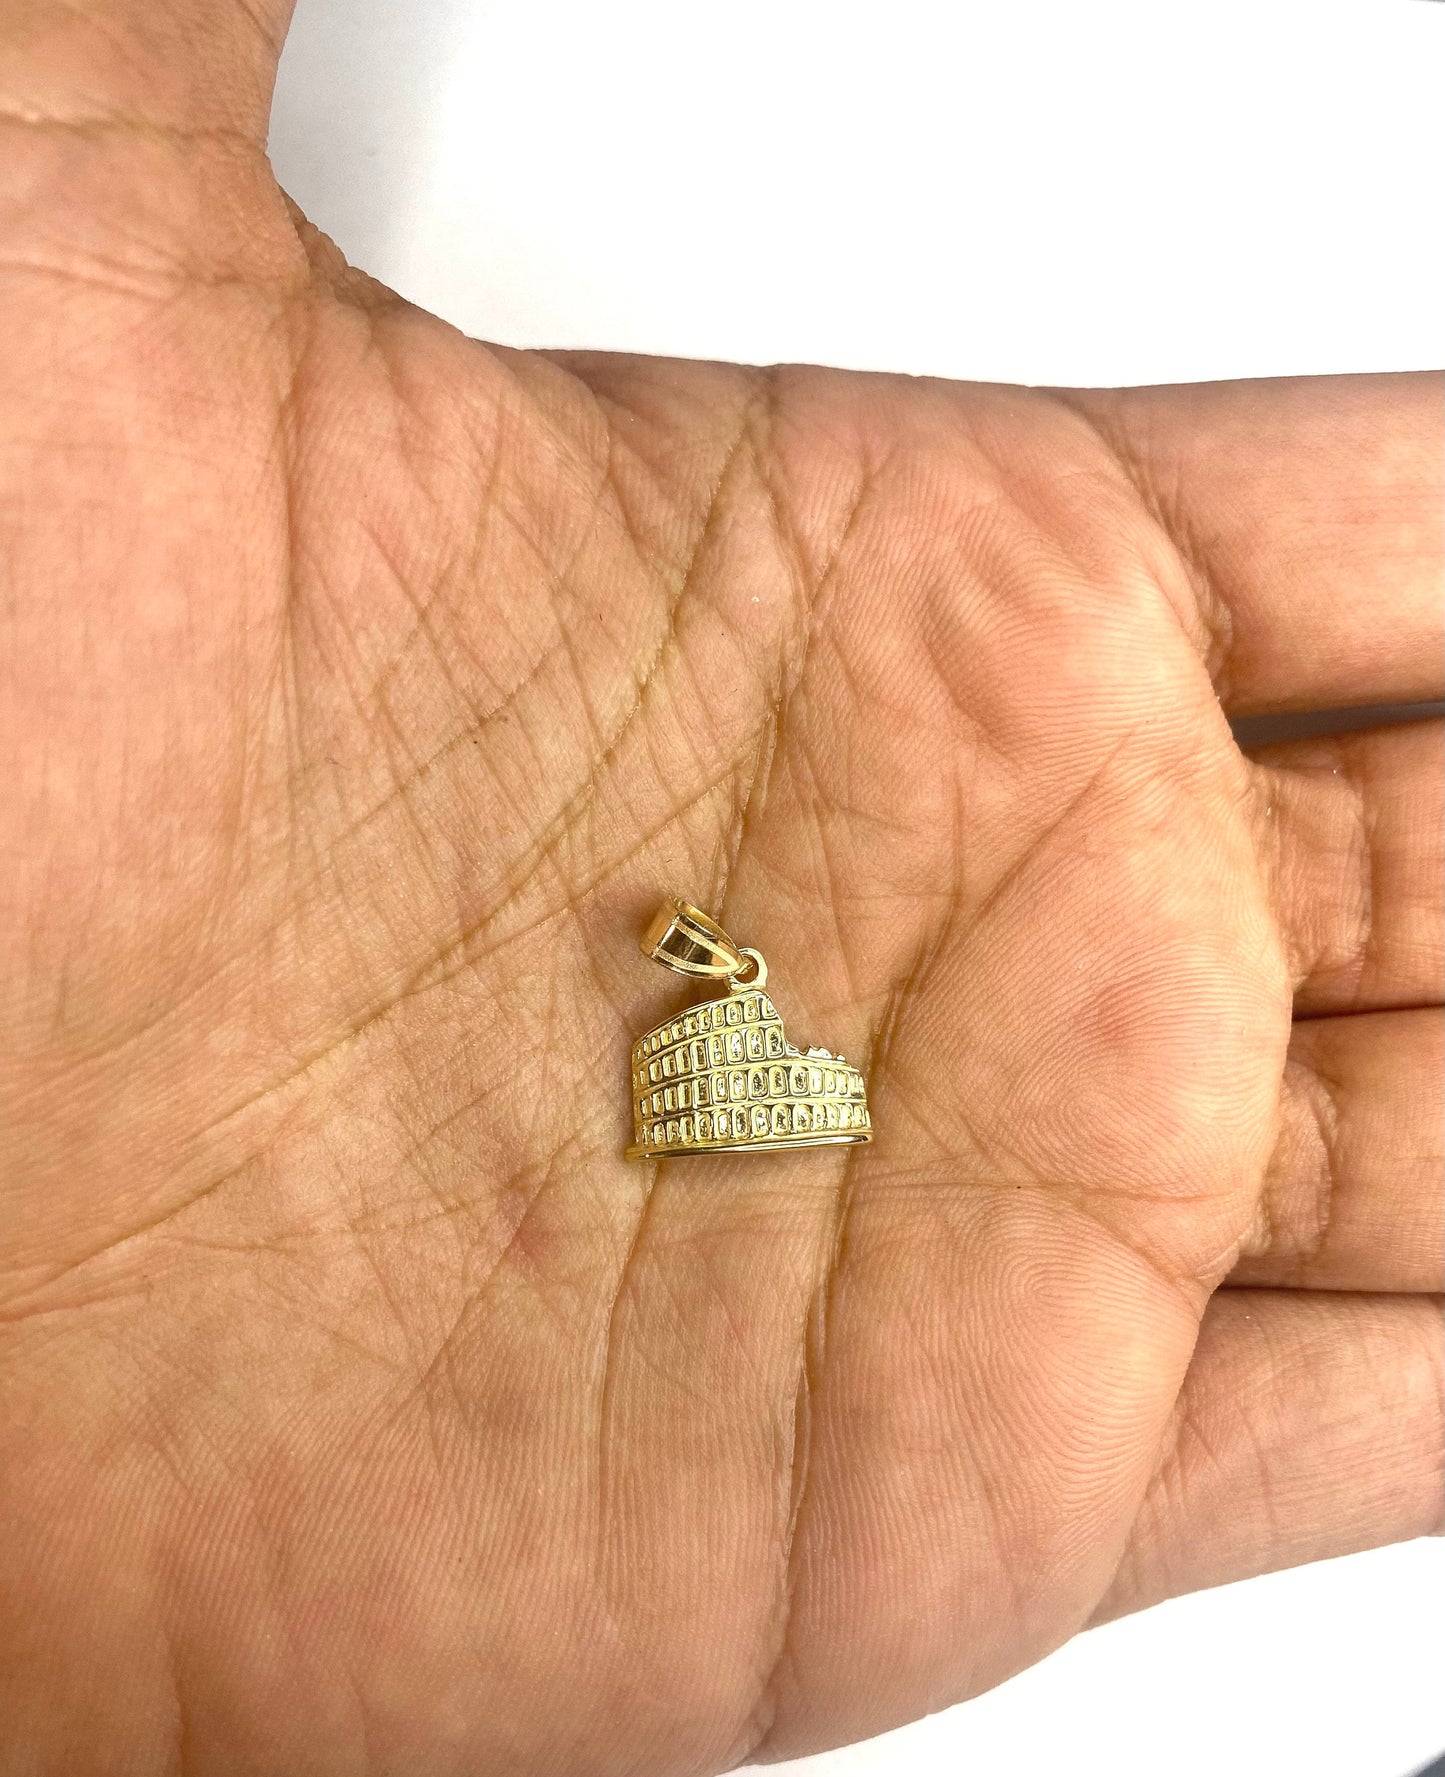 14K Solid Yellow Gold Textured Italy Coliseum Charm Pendant Charm .6" Longx.6" Wide. Destination Travel Great 4 Necklace or Charm Bracelet